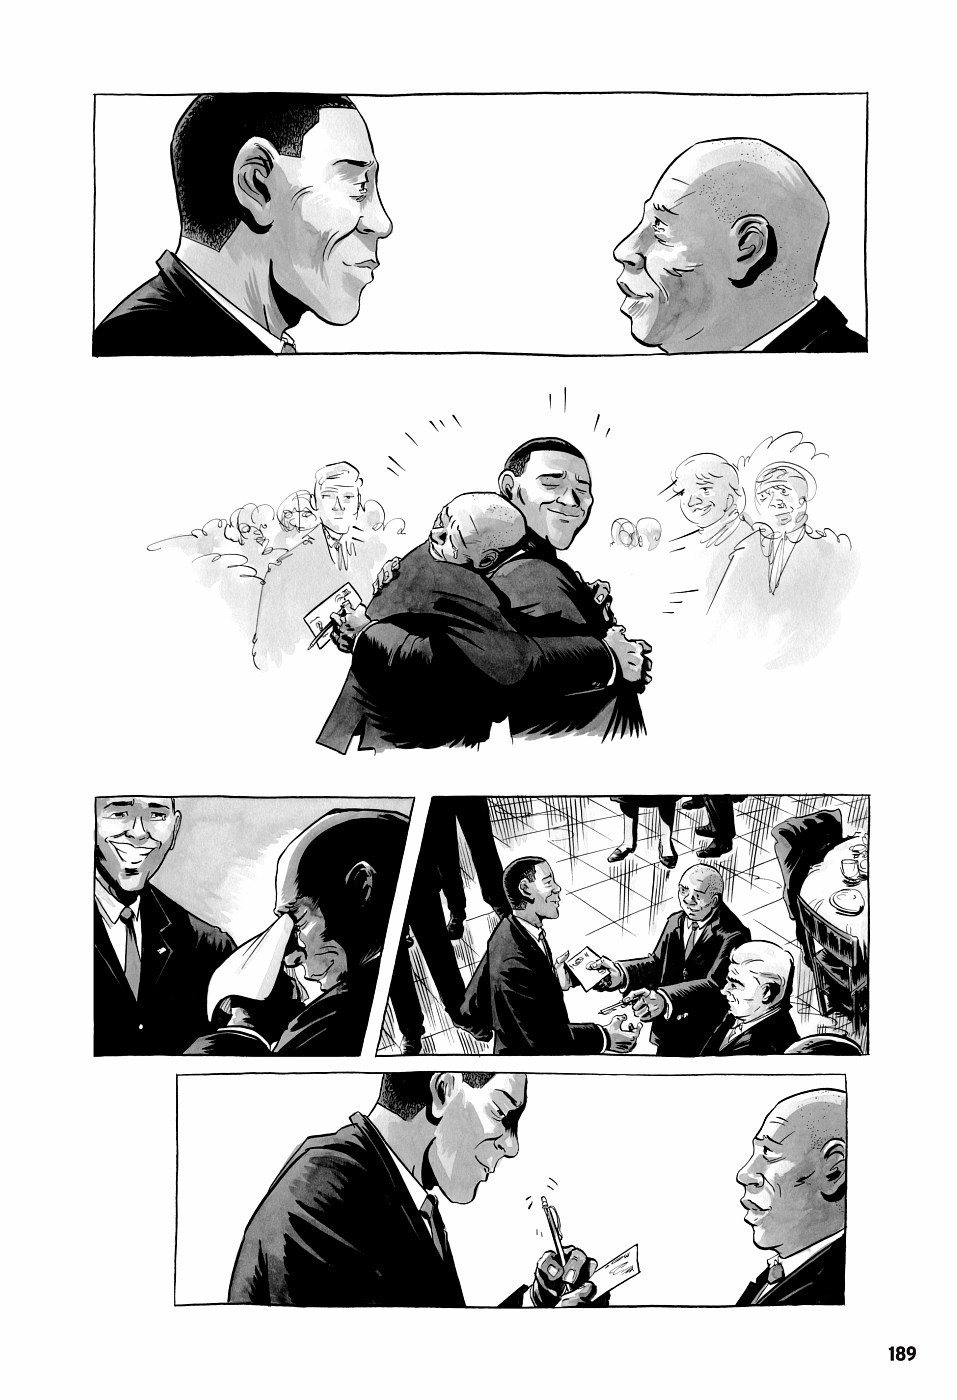 page 189 of march book three graphic novel